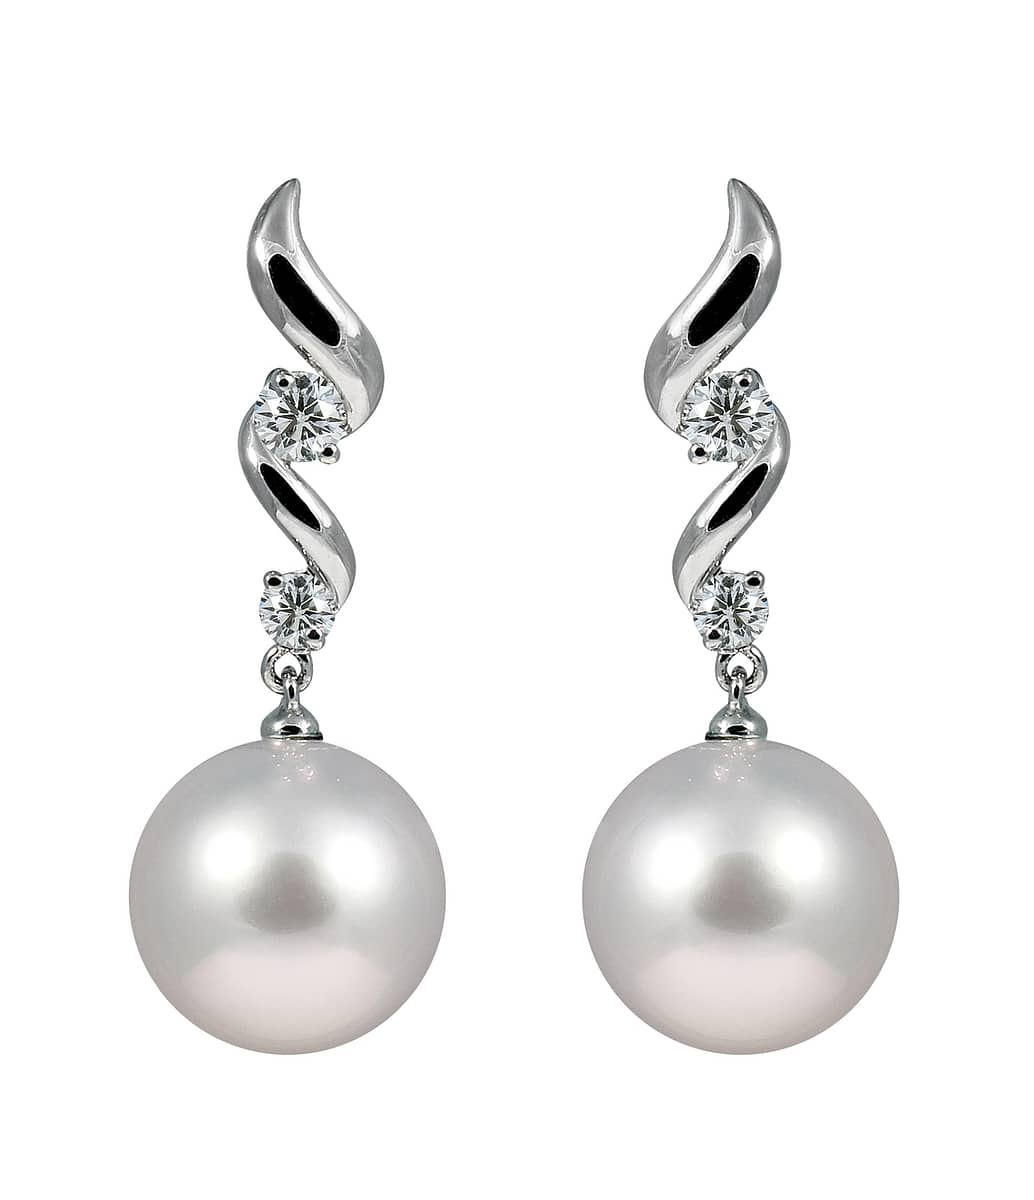 Yoko London South Sea Pearl Drop Earrings with 10-11mm Cultured Pearls and 0.22 Carat Diamonds set in 18ct White Gold in a Twirl Design.